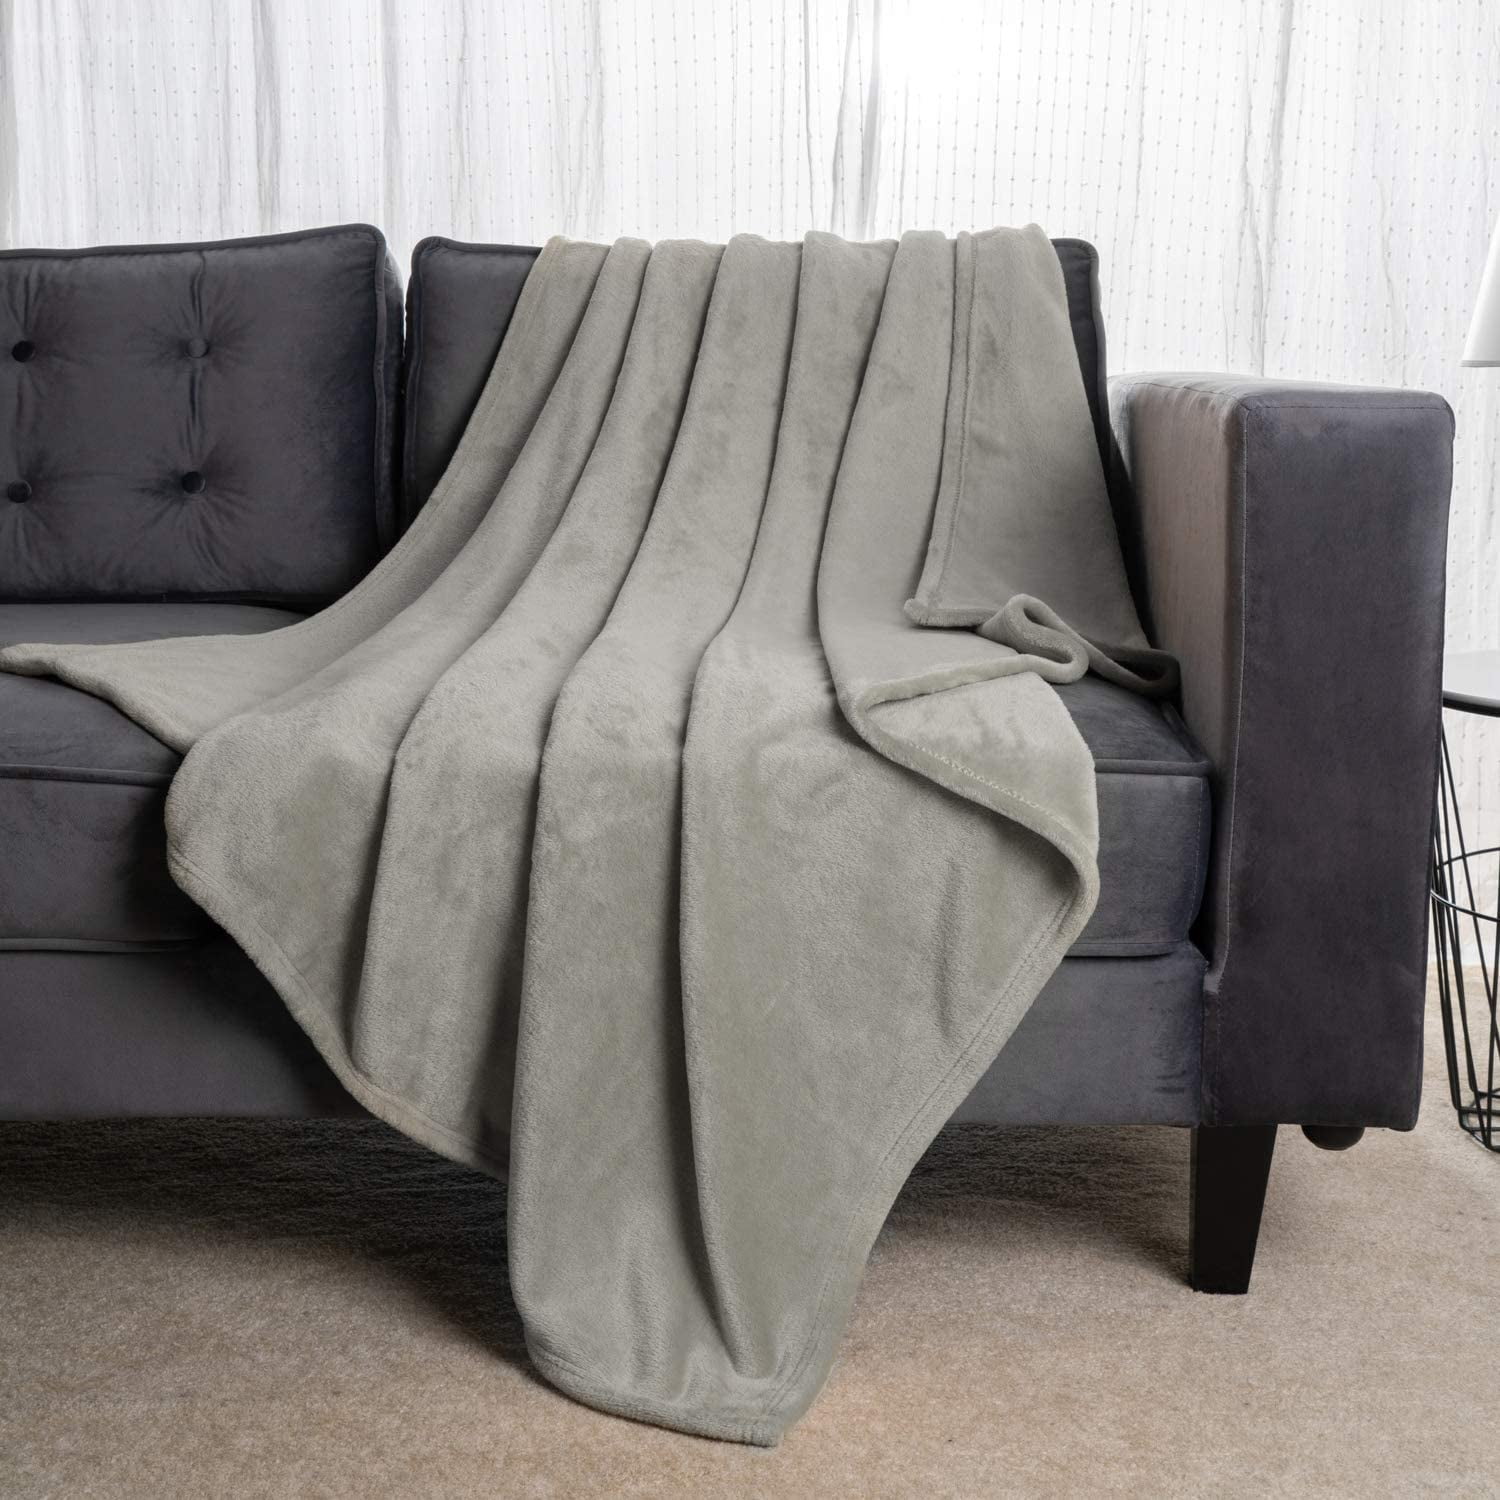 Details about   Soft Sherpa Velvet Fleece Blanket Plush Warm Throw Sofa Bed Couch Twin Full Size 